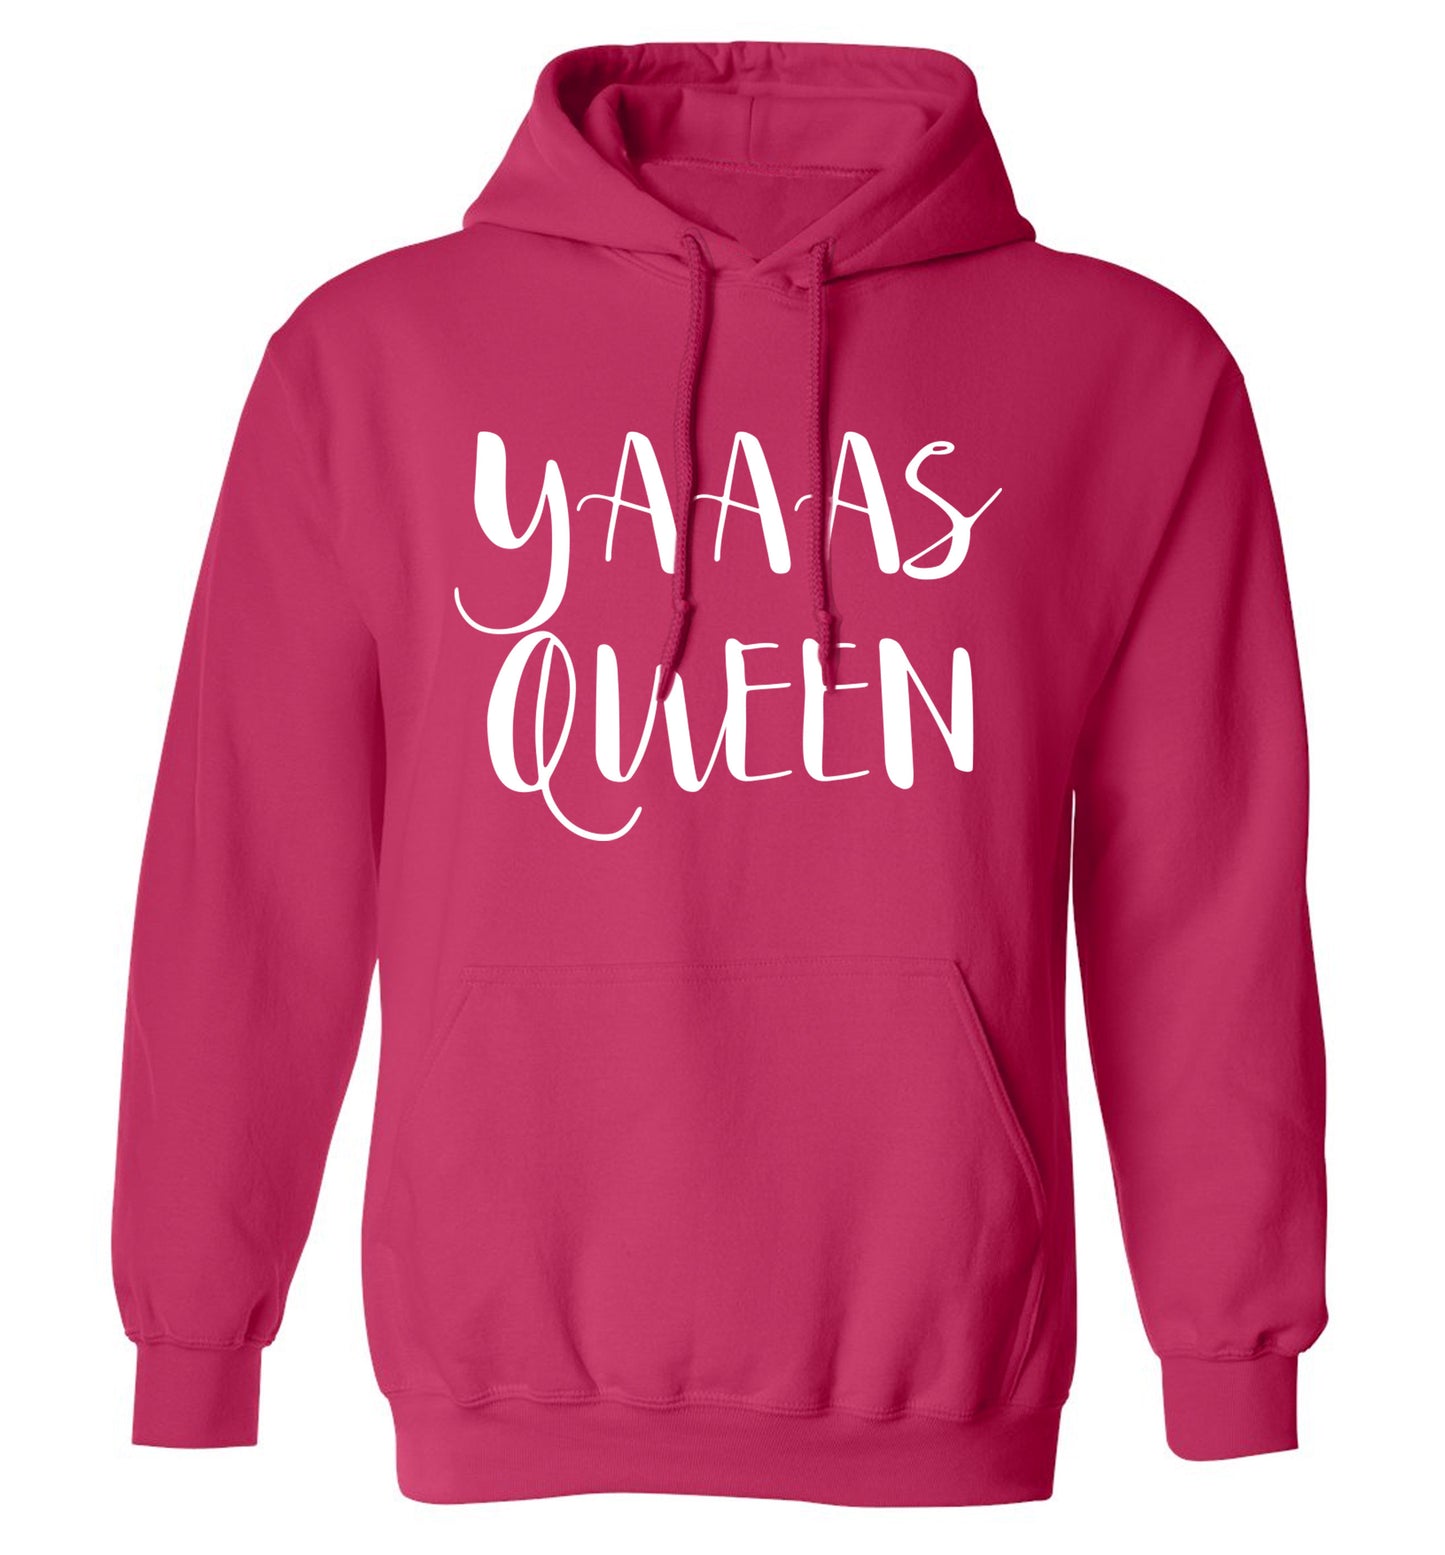 Yas Queen adults unisex pink hoodie 2XL